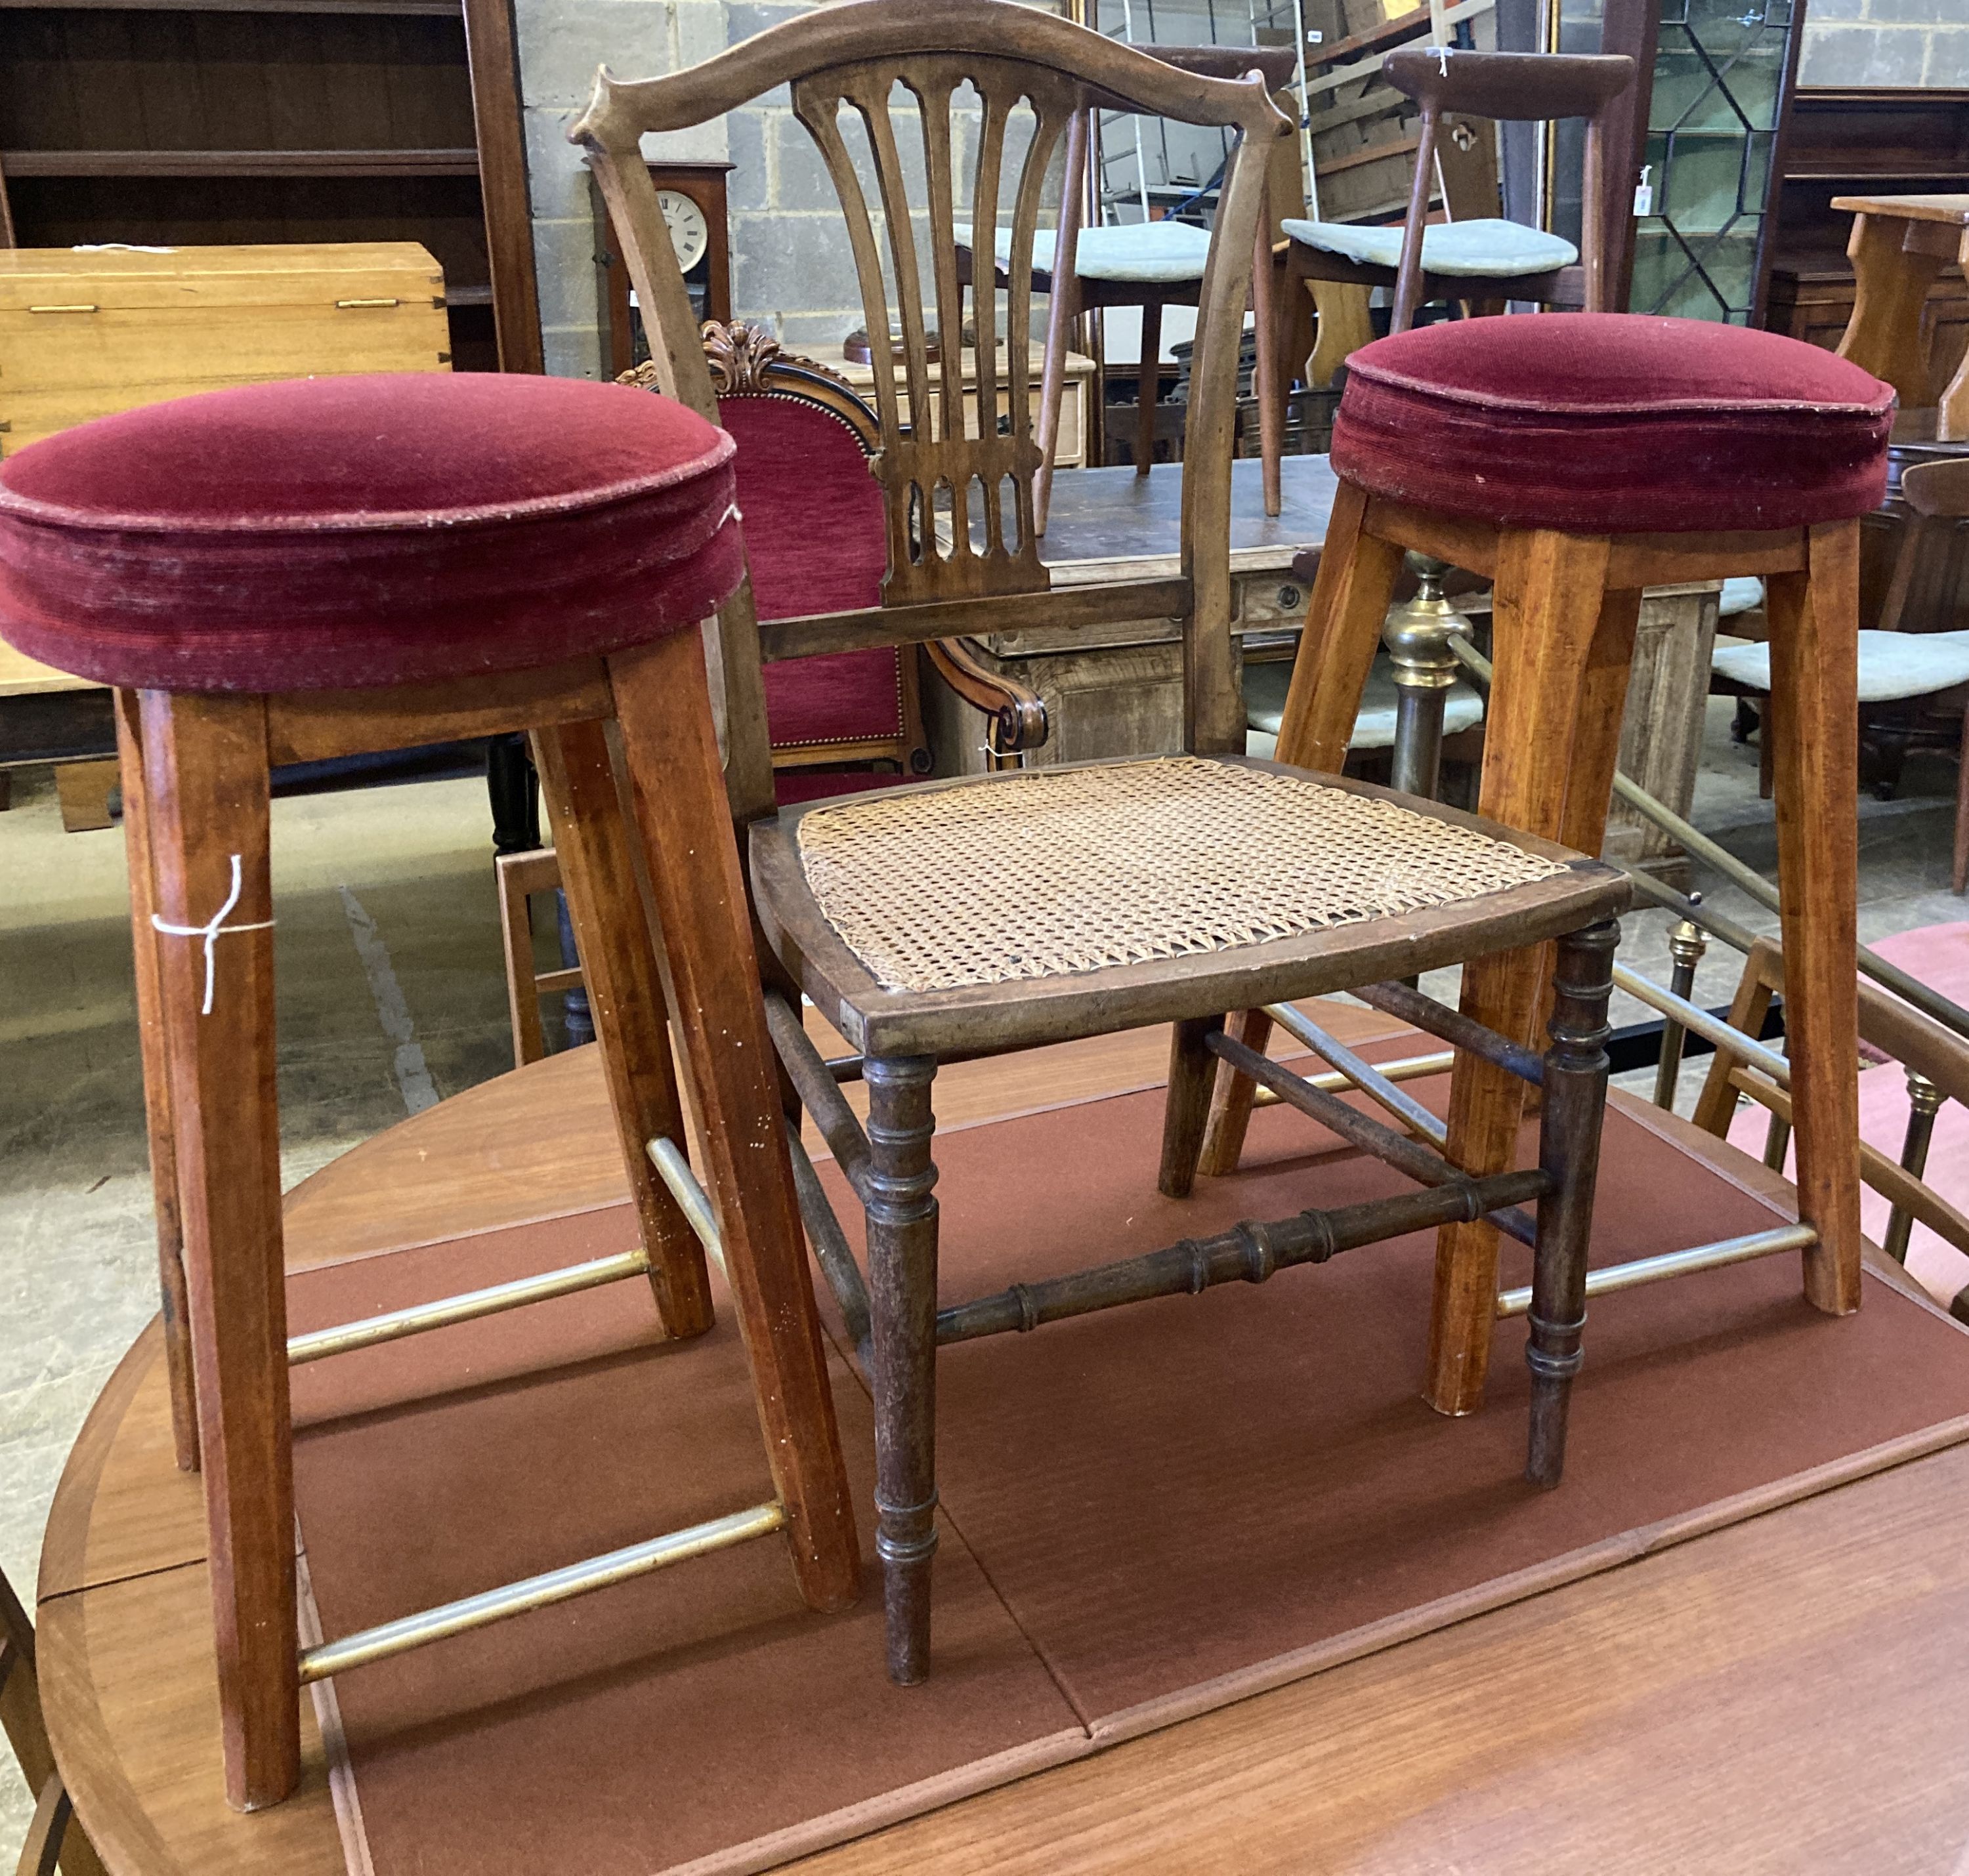 An Edwardian cane seat chair and a pair of beech stools